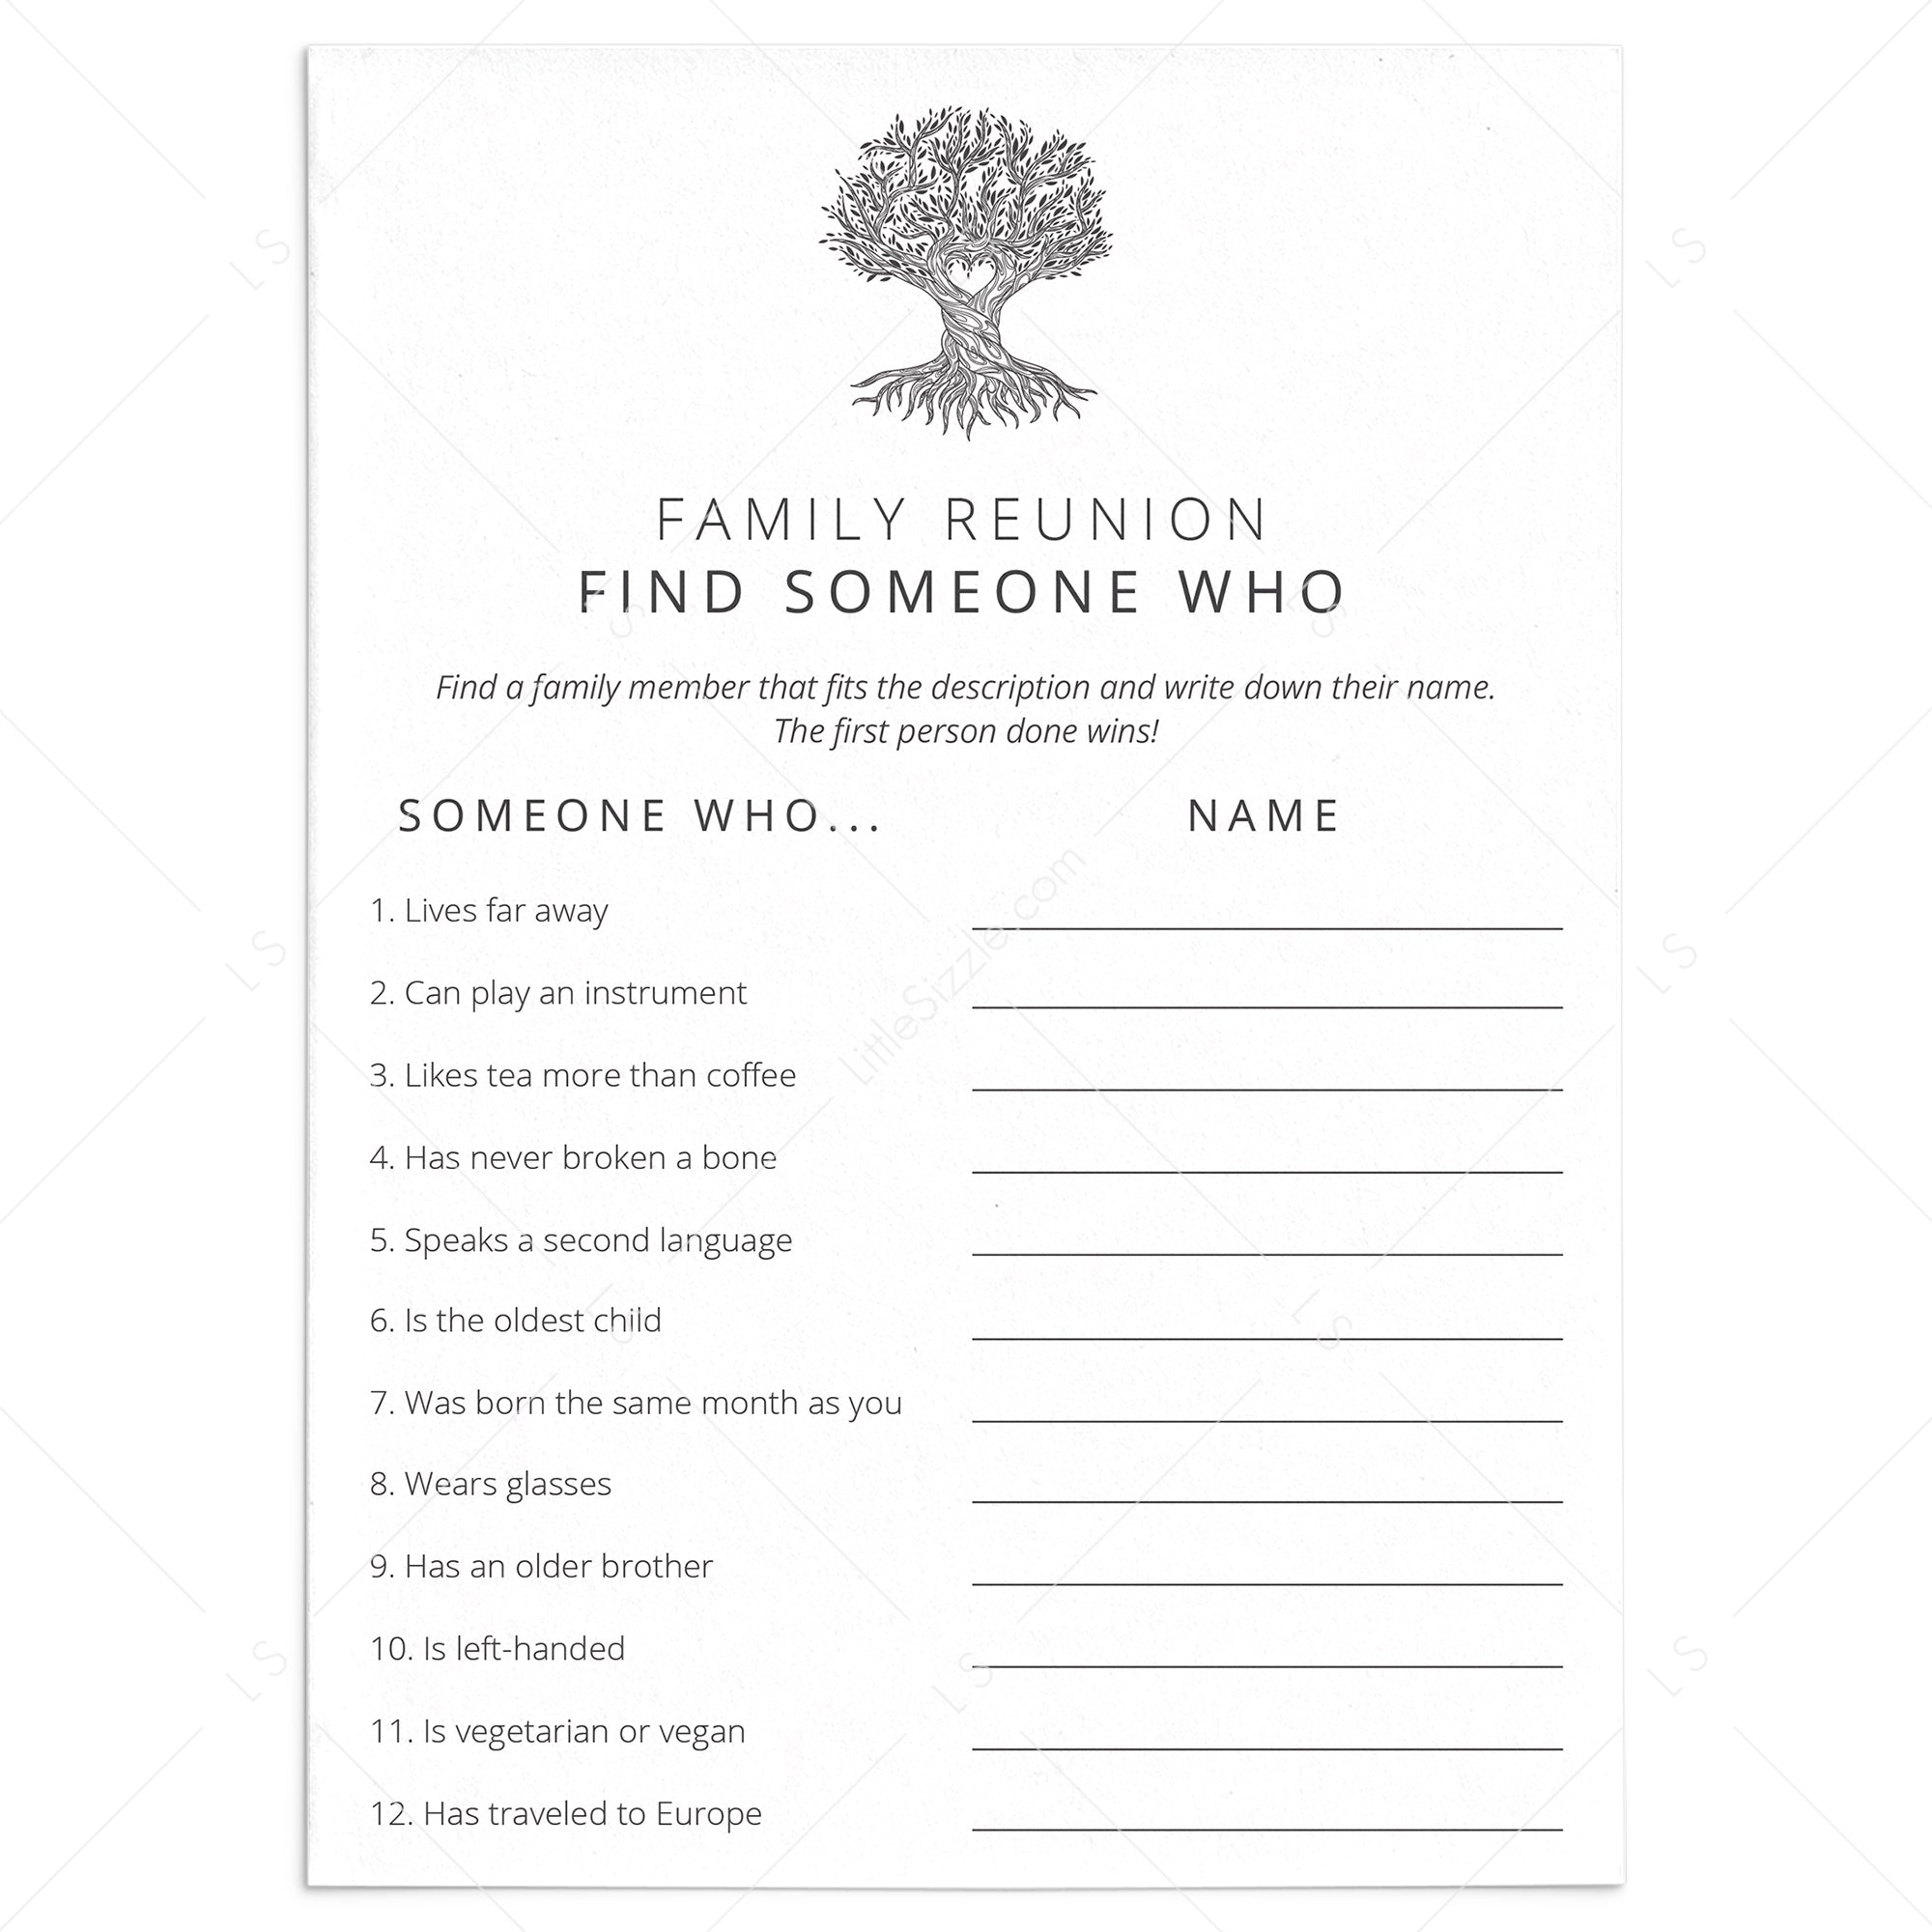 Printable Family Reunion Icebreaker Game Find Someone Who by LittleSizzle